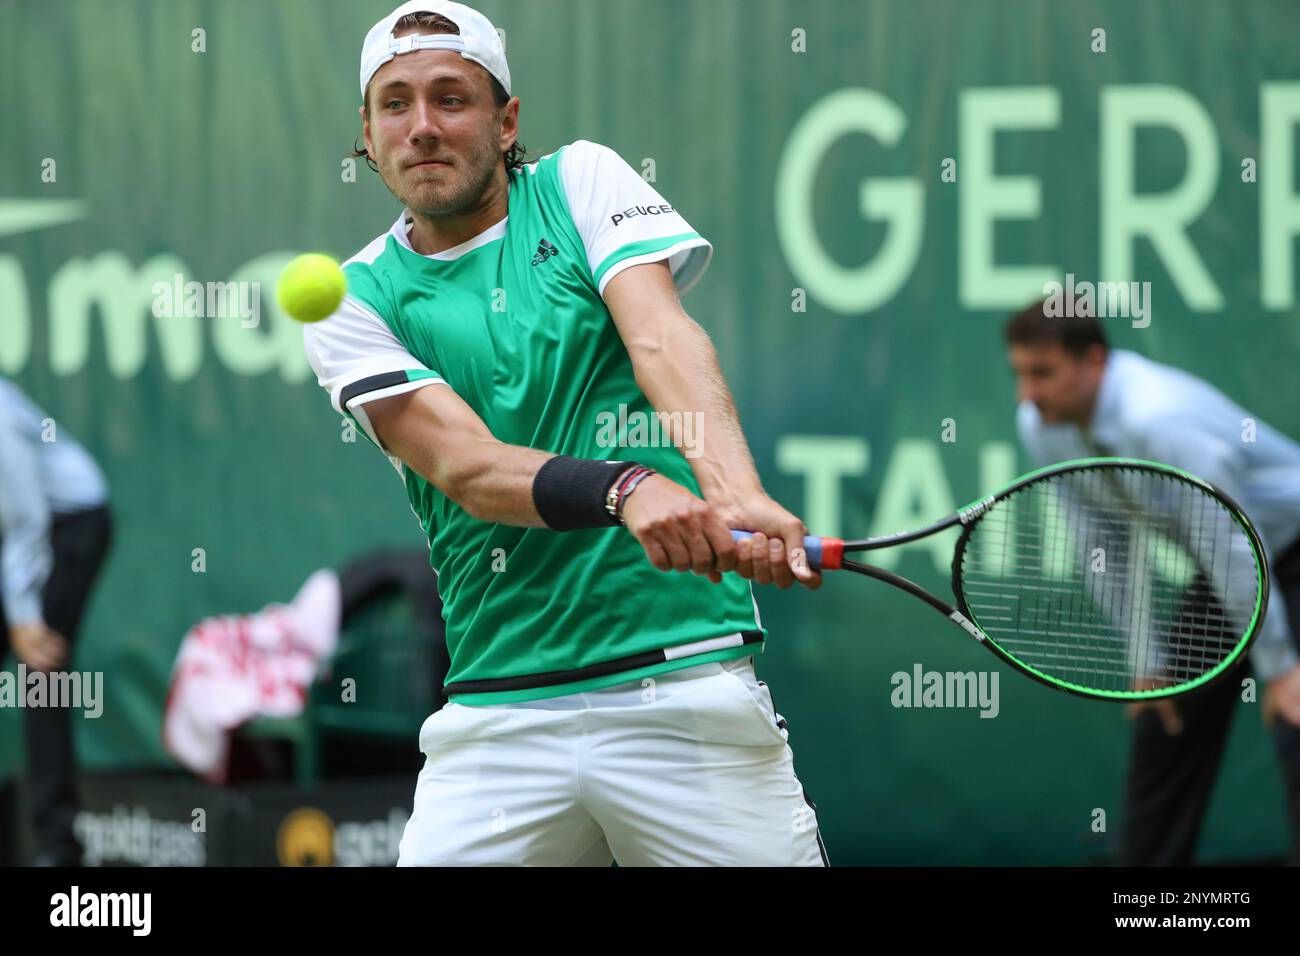 France's Lucas Pouille returns a shot to Germany's Florian Mayer, during  their match at the Gerry Weber Open tennis tournament in Halle, Germany,  Thursday, June 22, 2017. ( Friso Gentsch/dpa via AP